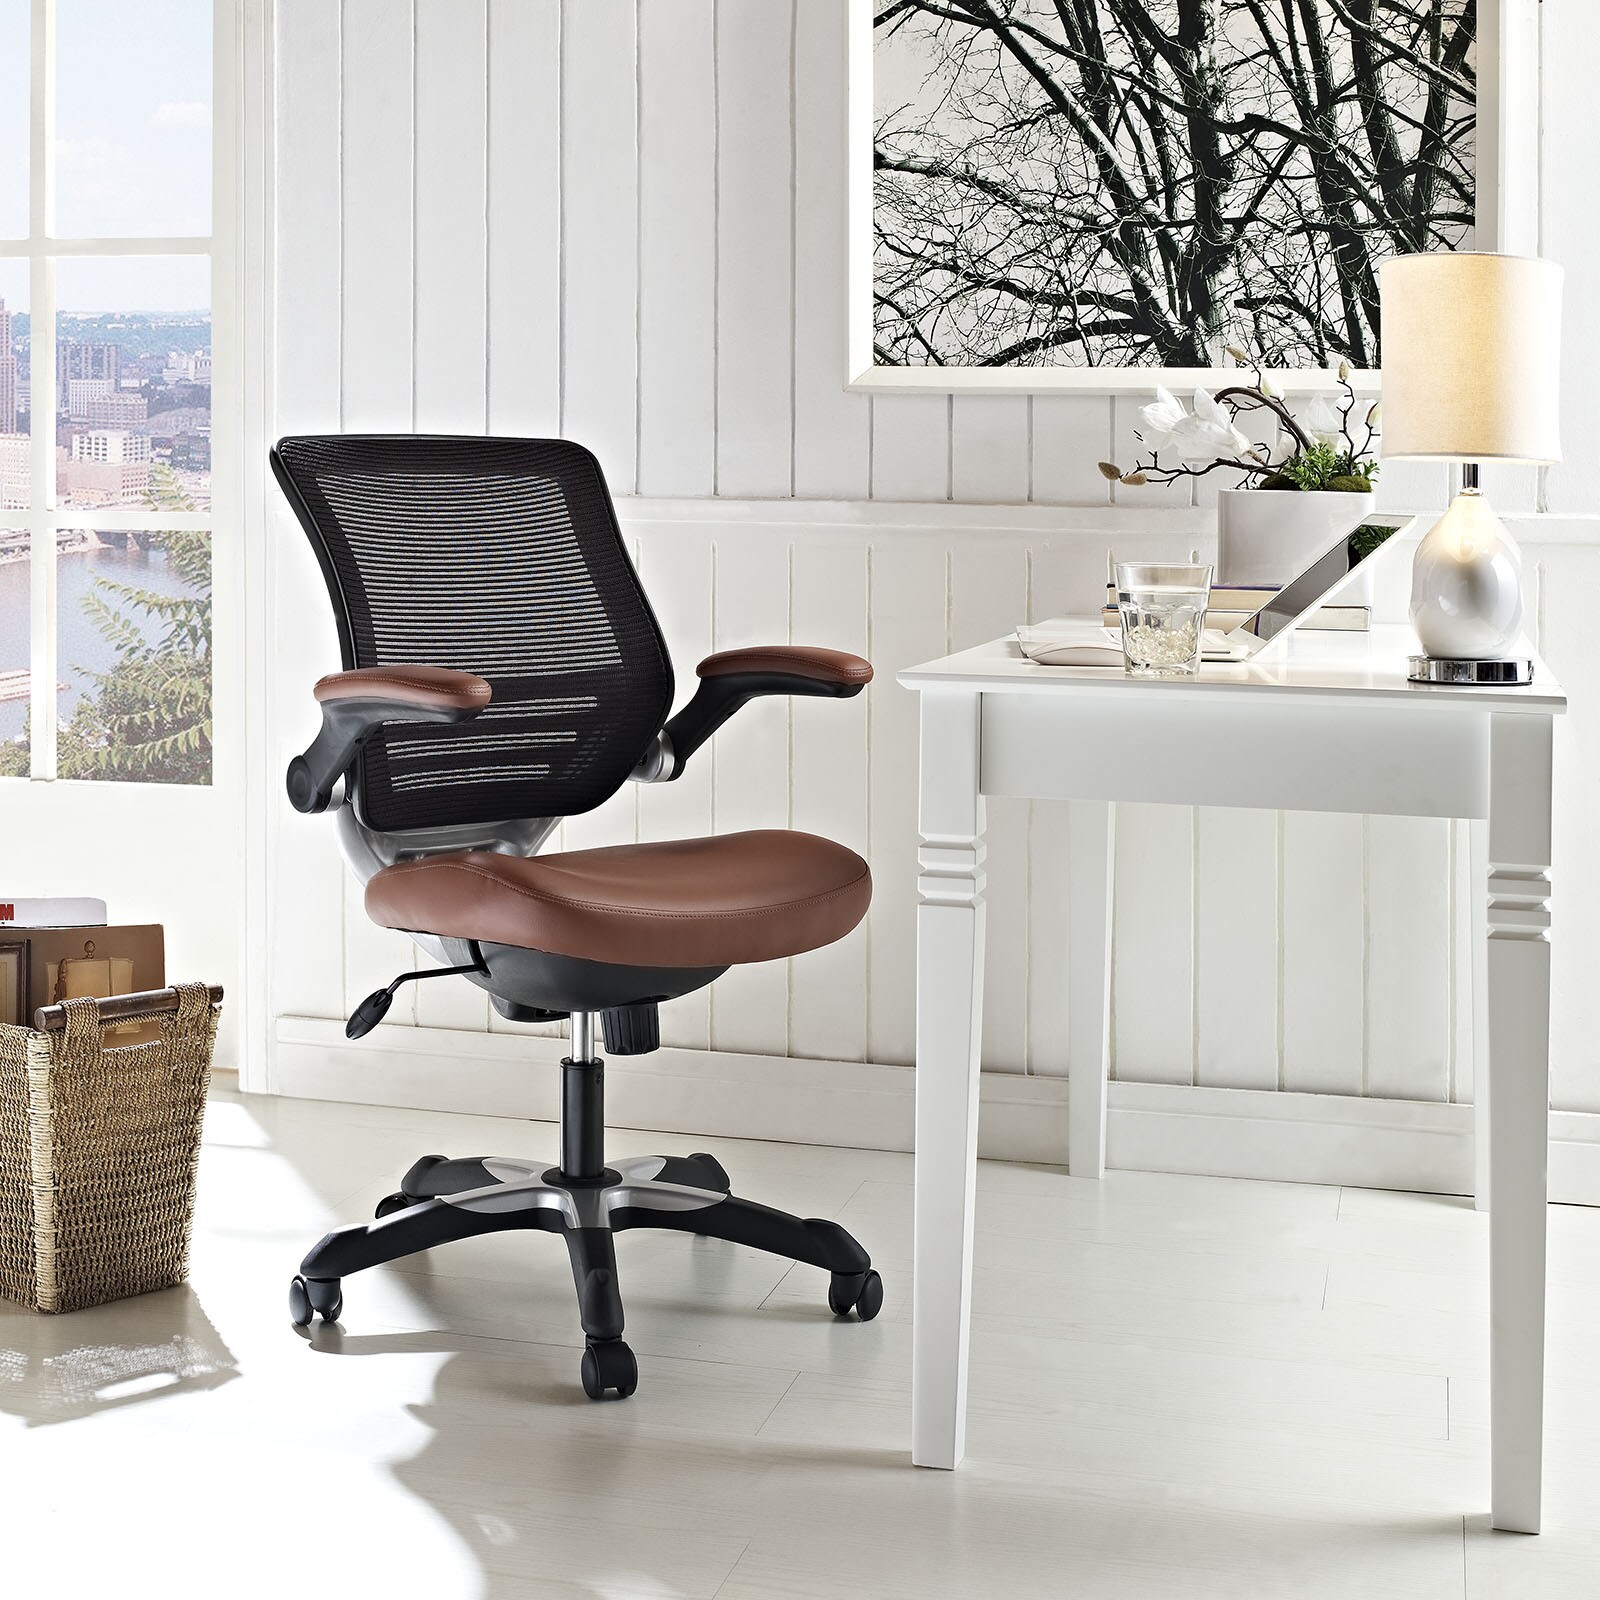 Expedition Mesh/ Black Leatherette Office Chair Today $154.99